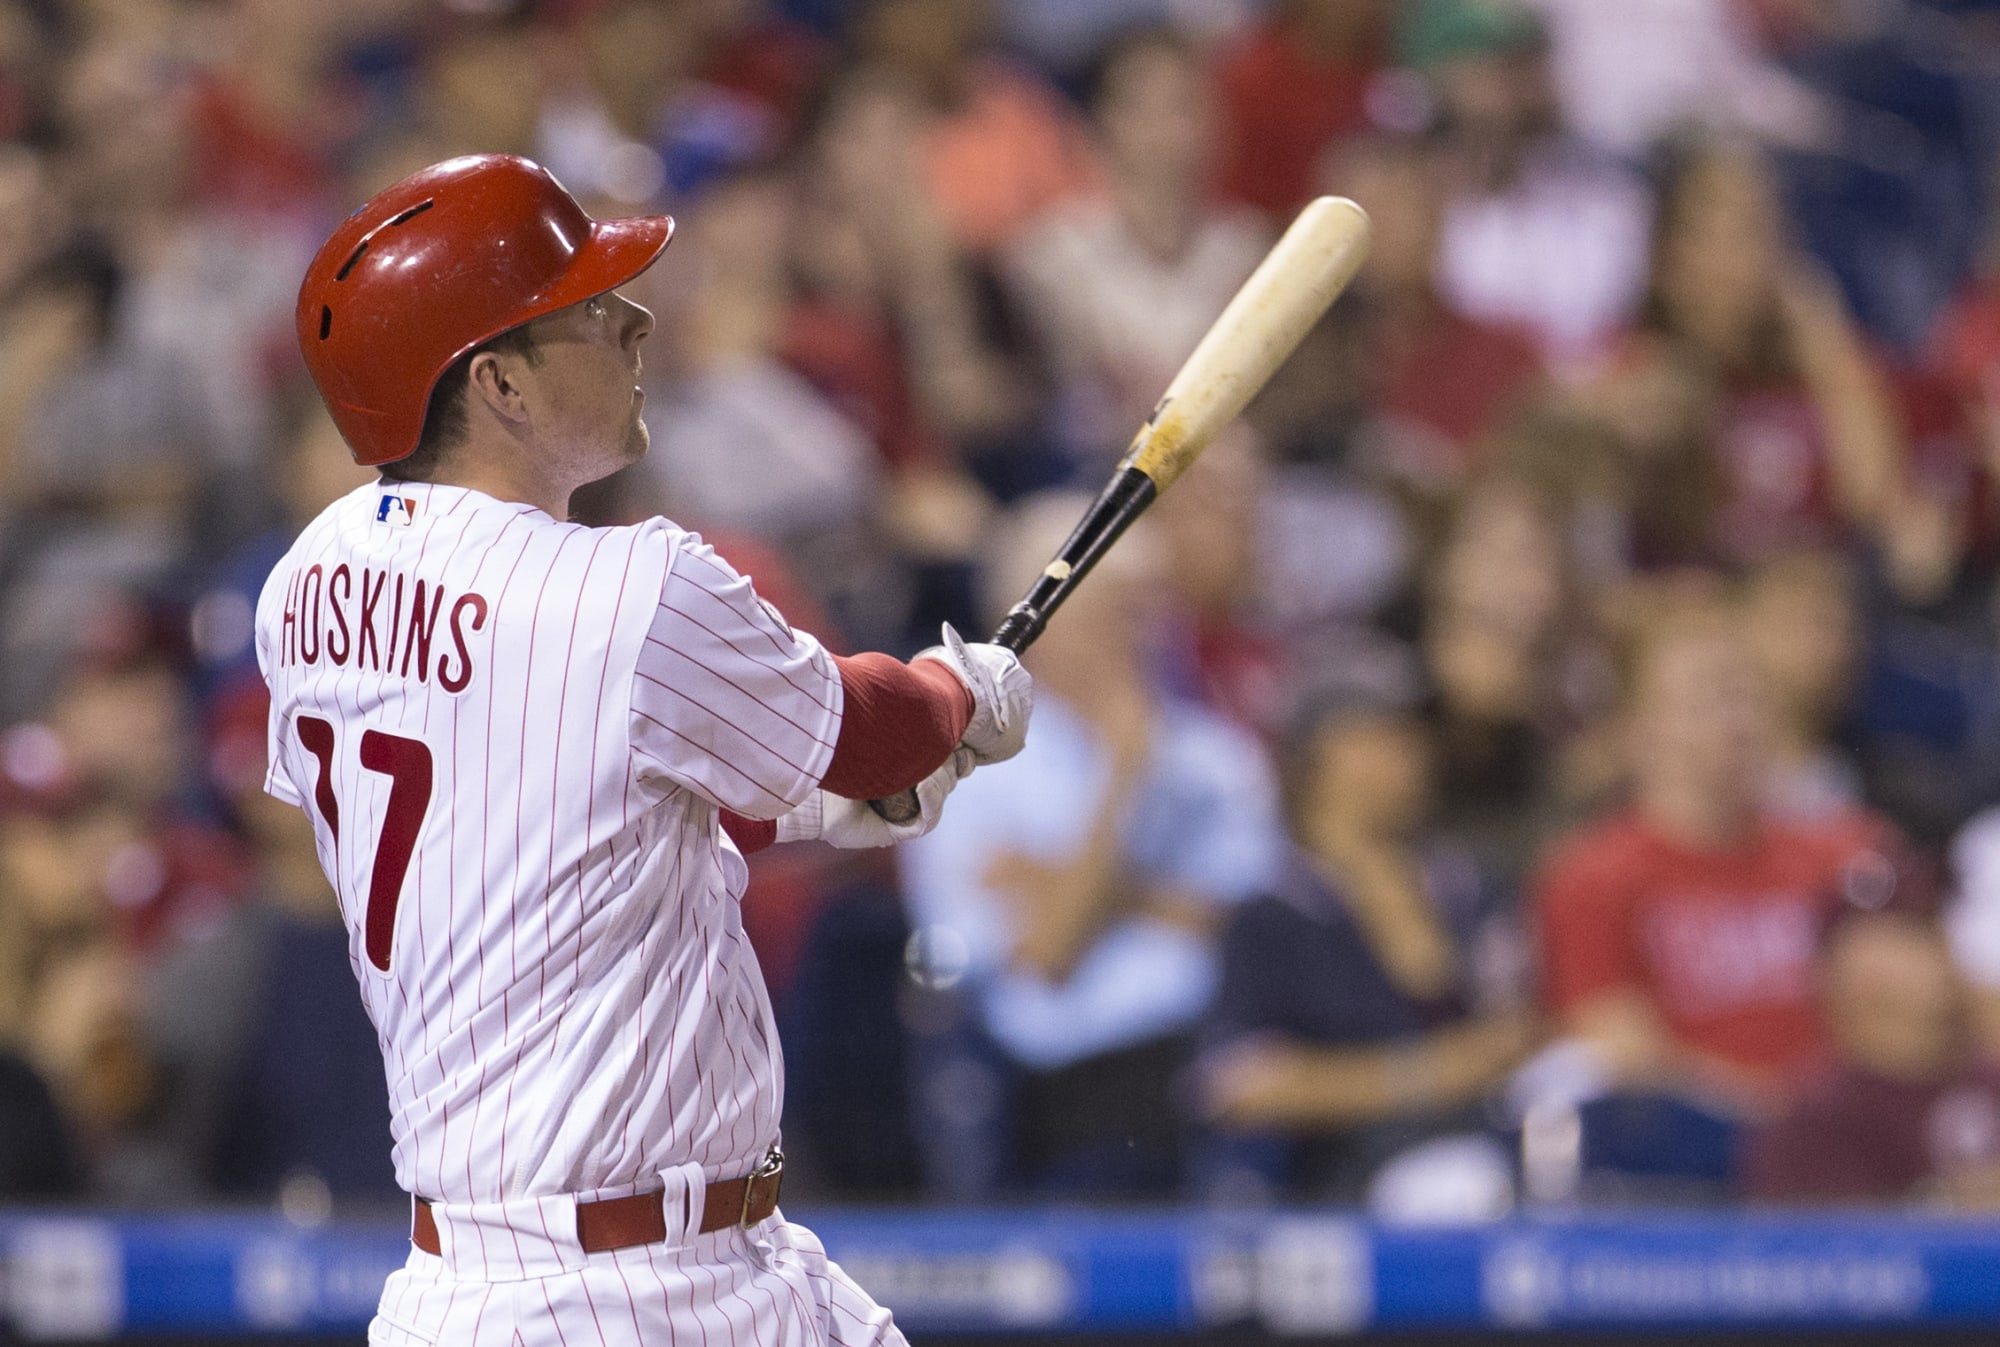 Could Rhys Hoskins lead the Phillies in home runs this season?